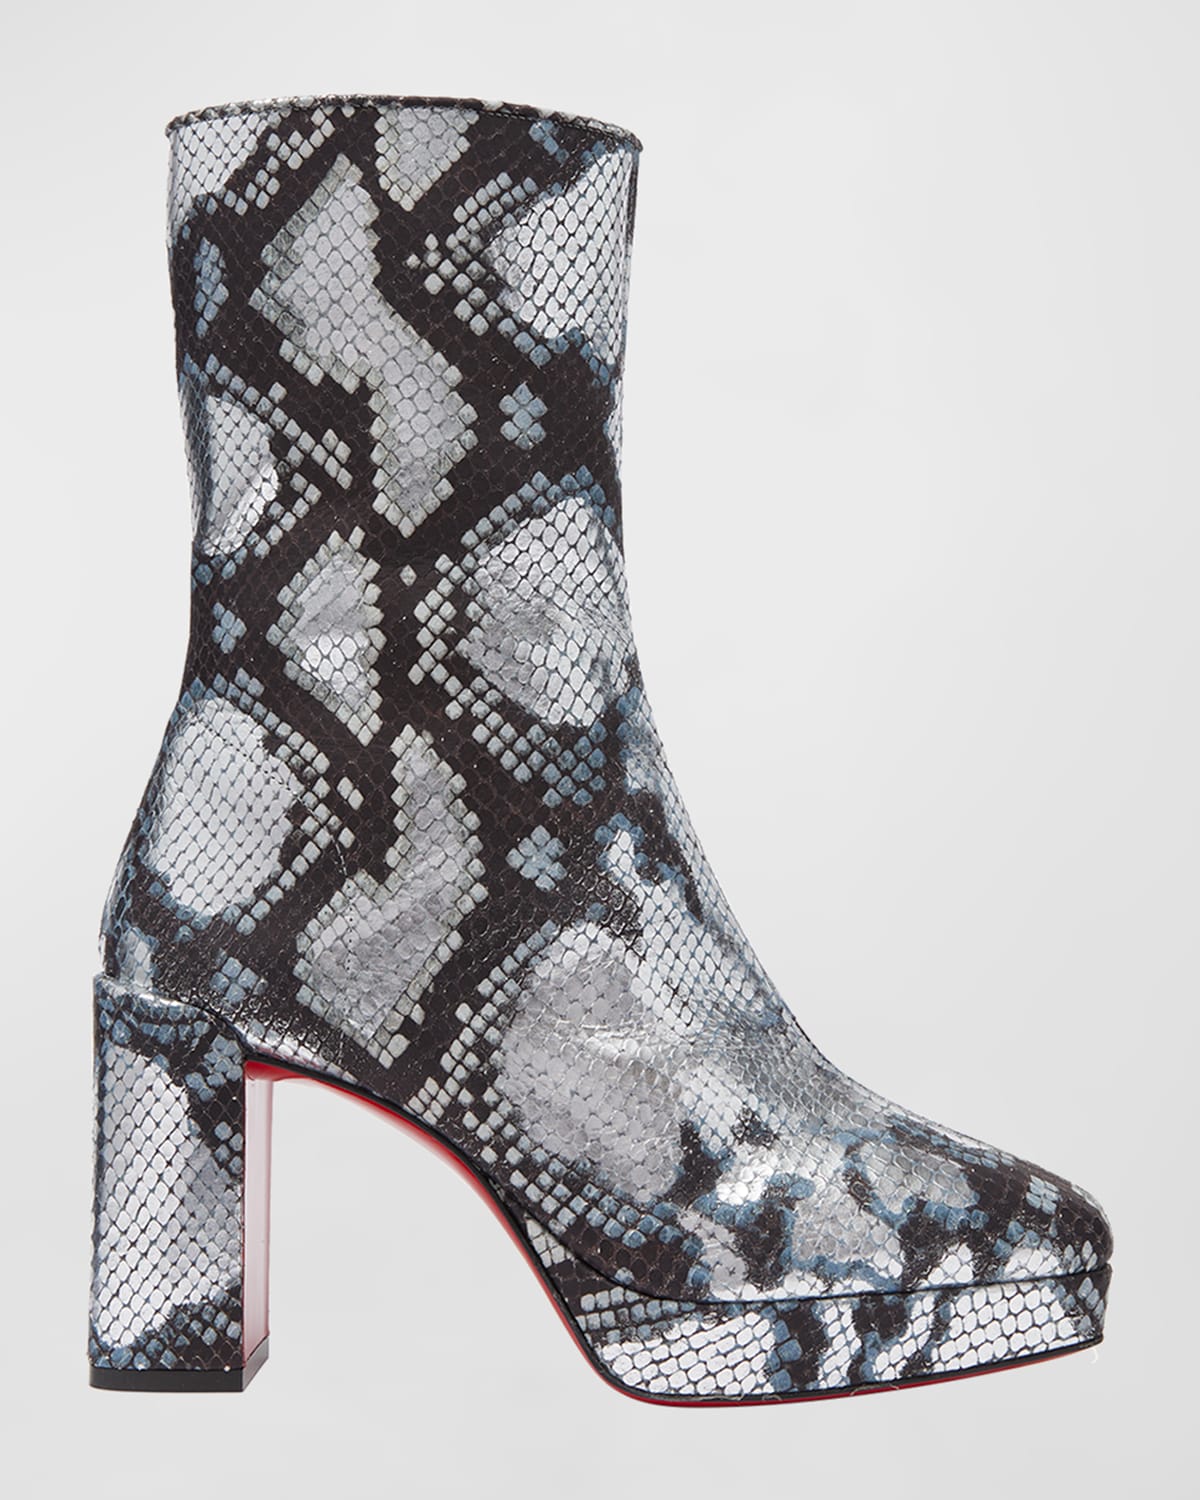 Alleo 90 Red Sole Snake-Embossed Booties